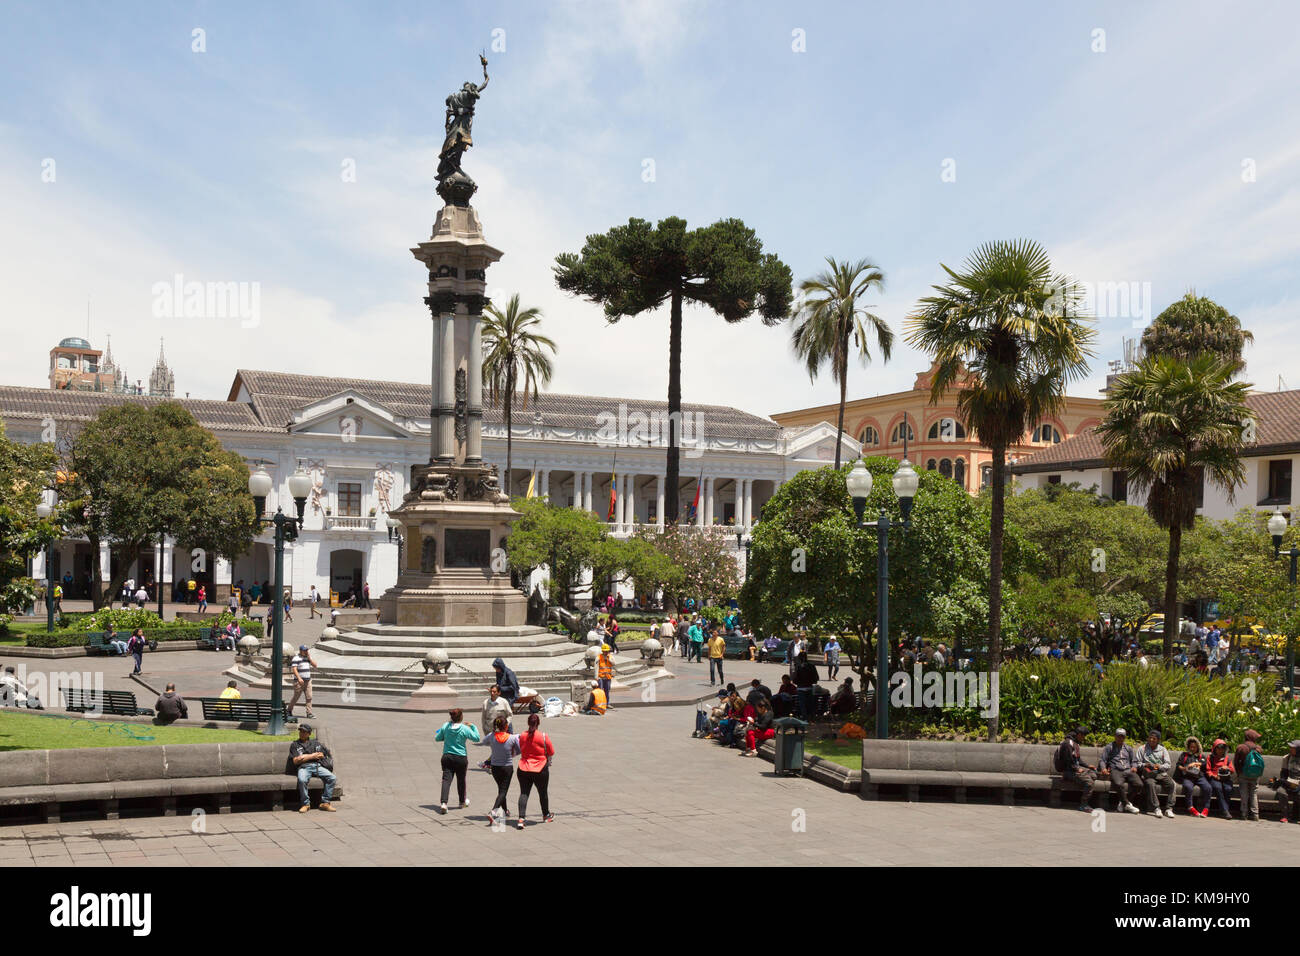 Quito Old Town, UNESCO World Heritage Site, Plaza Grande or Independence Square, Quito, Ecuador, South America Stock Photo